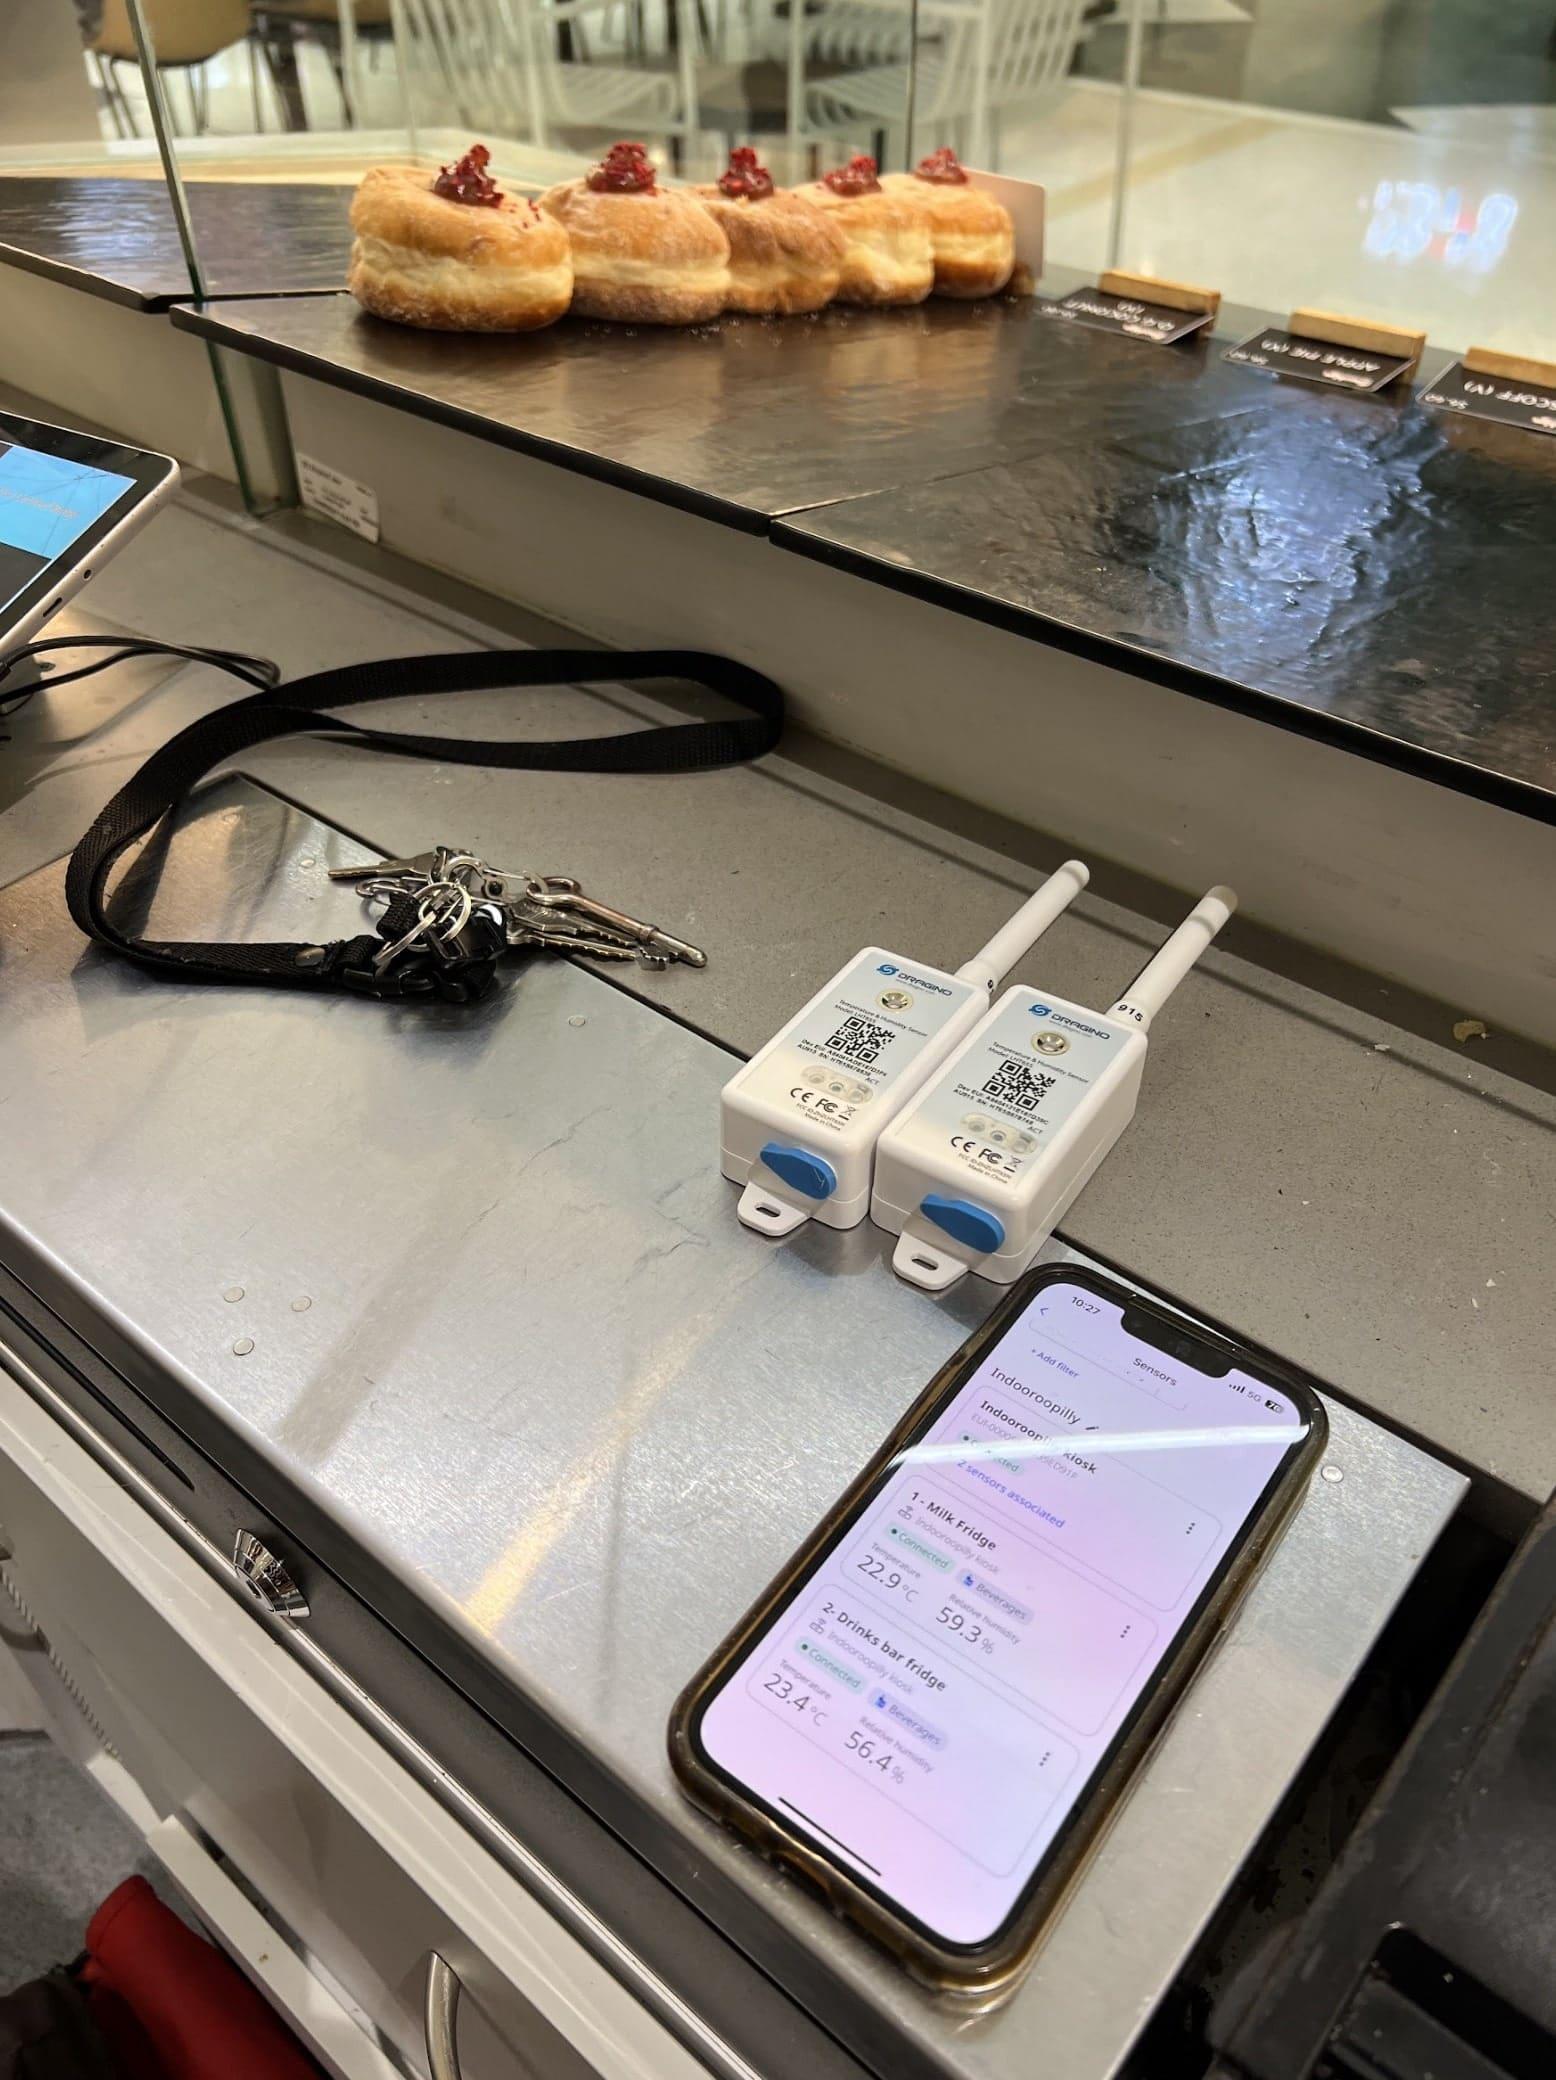 Using SafetyCulture Sensors at Brooklyn Donut & Coffee Co